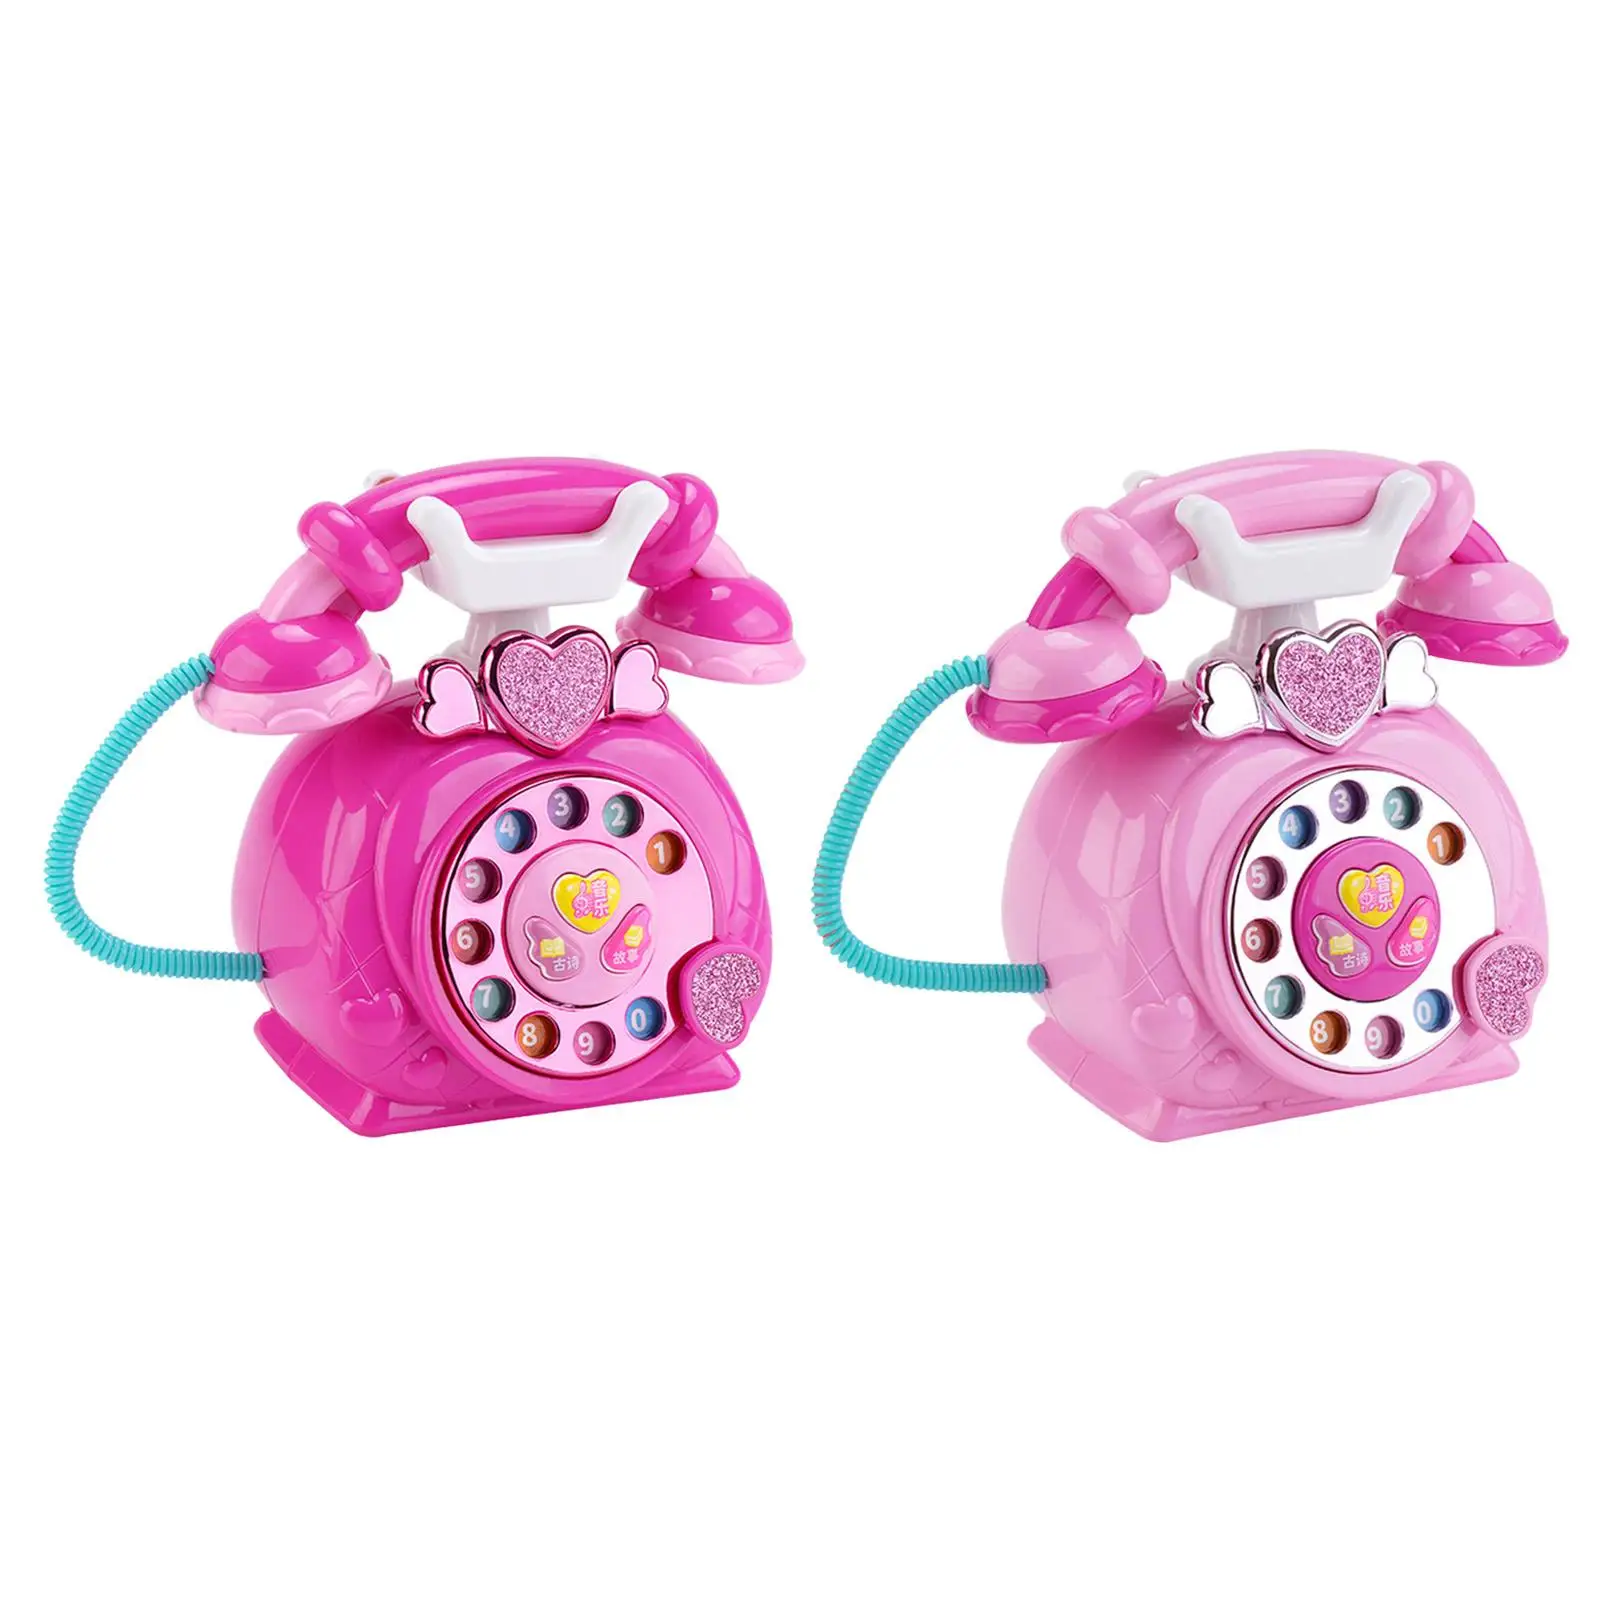 Telephone Toy Storytelling Machine Educational with Music Toy for Kids